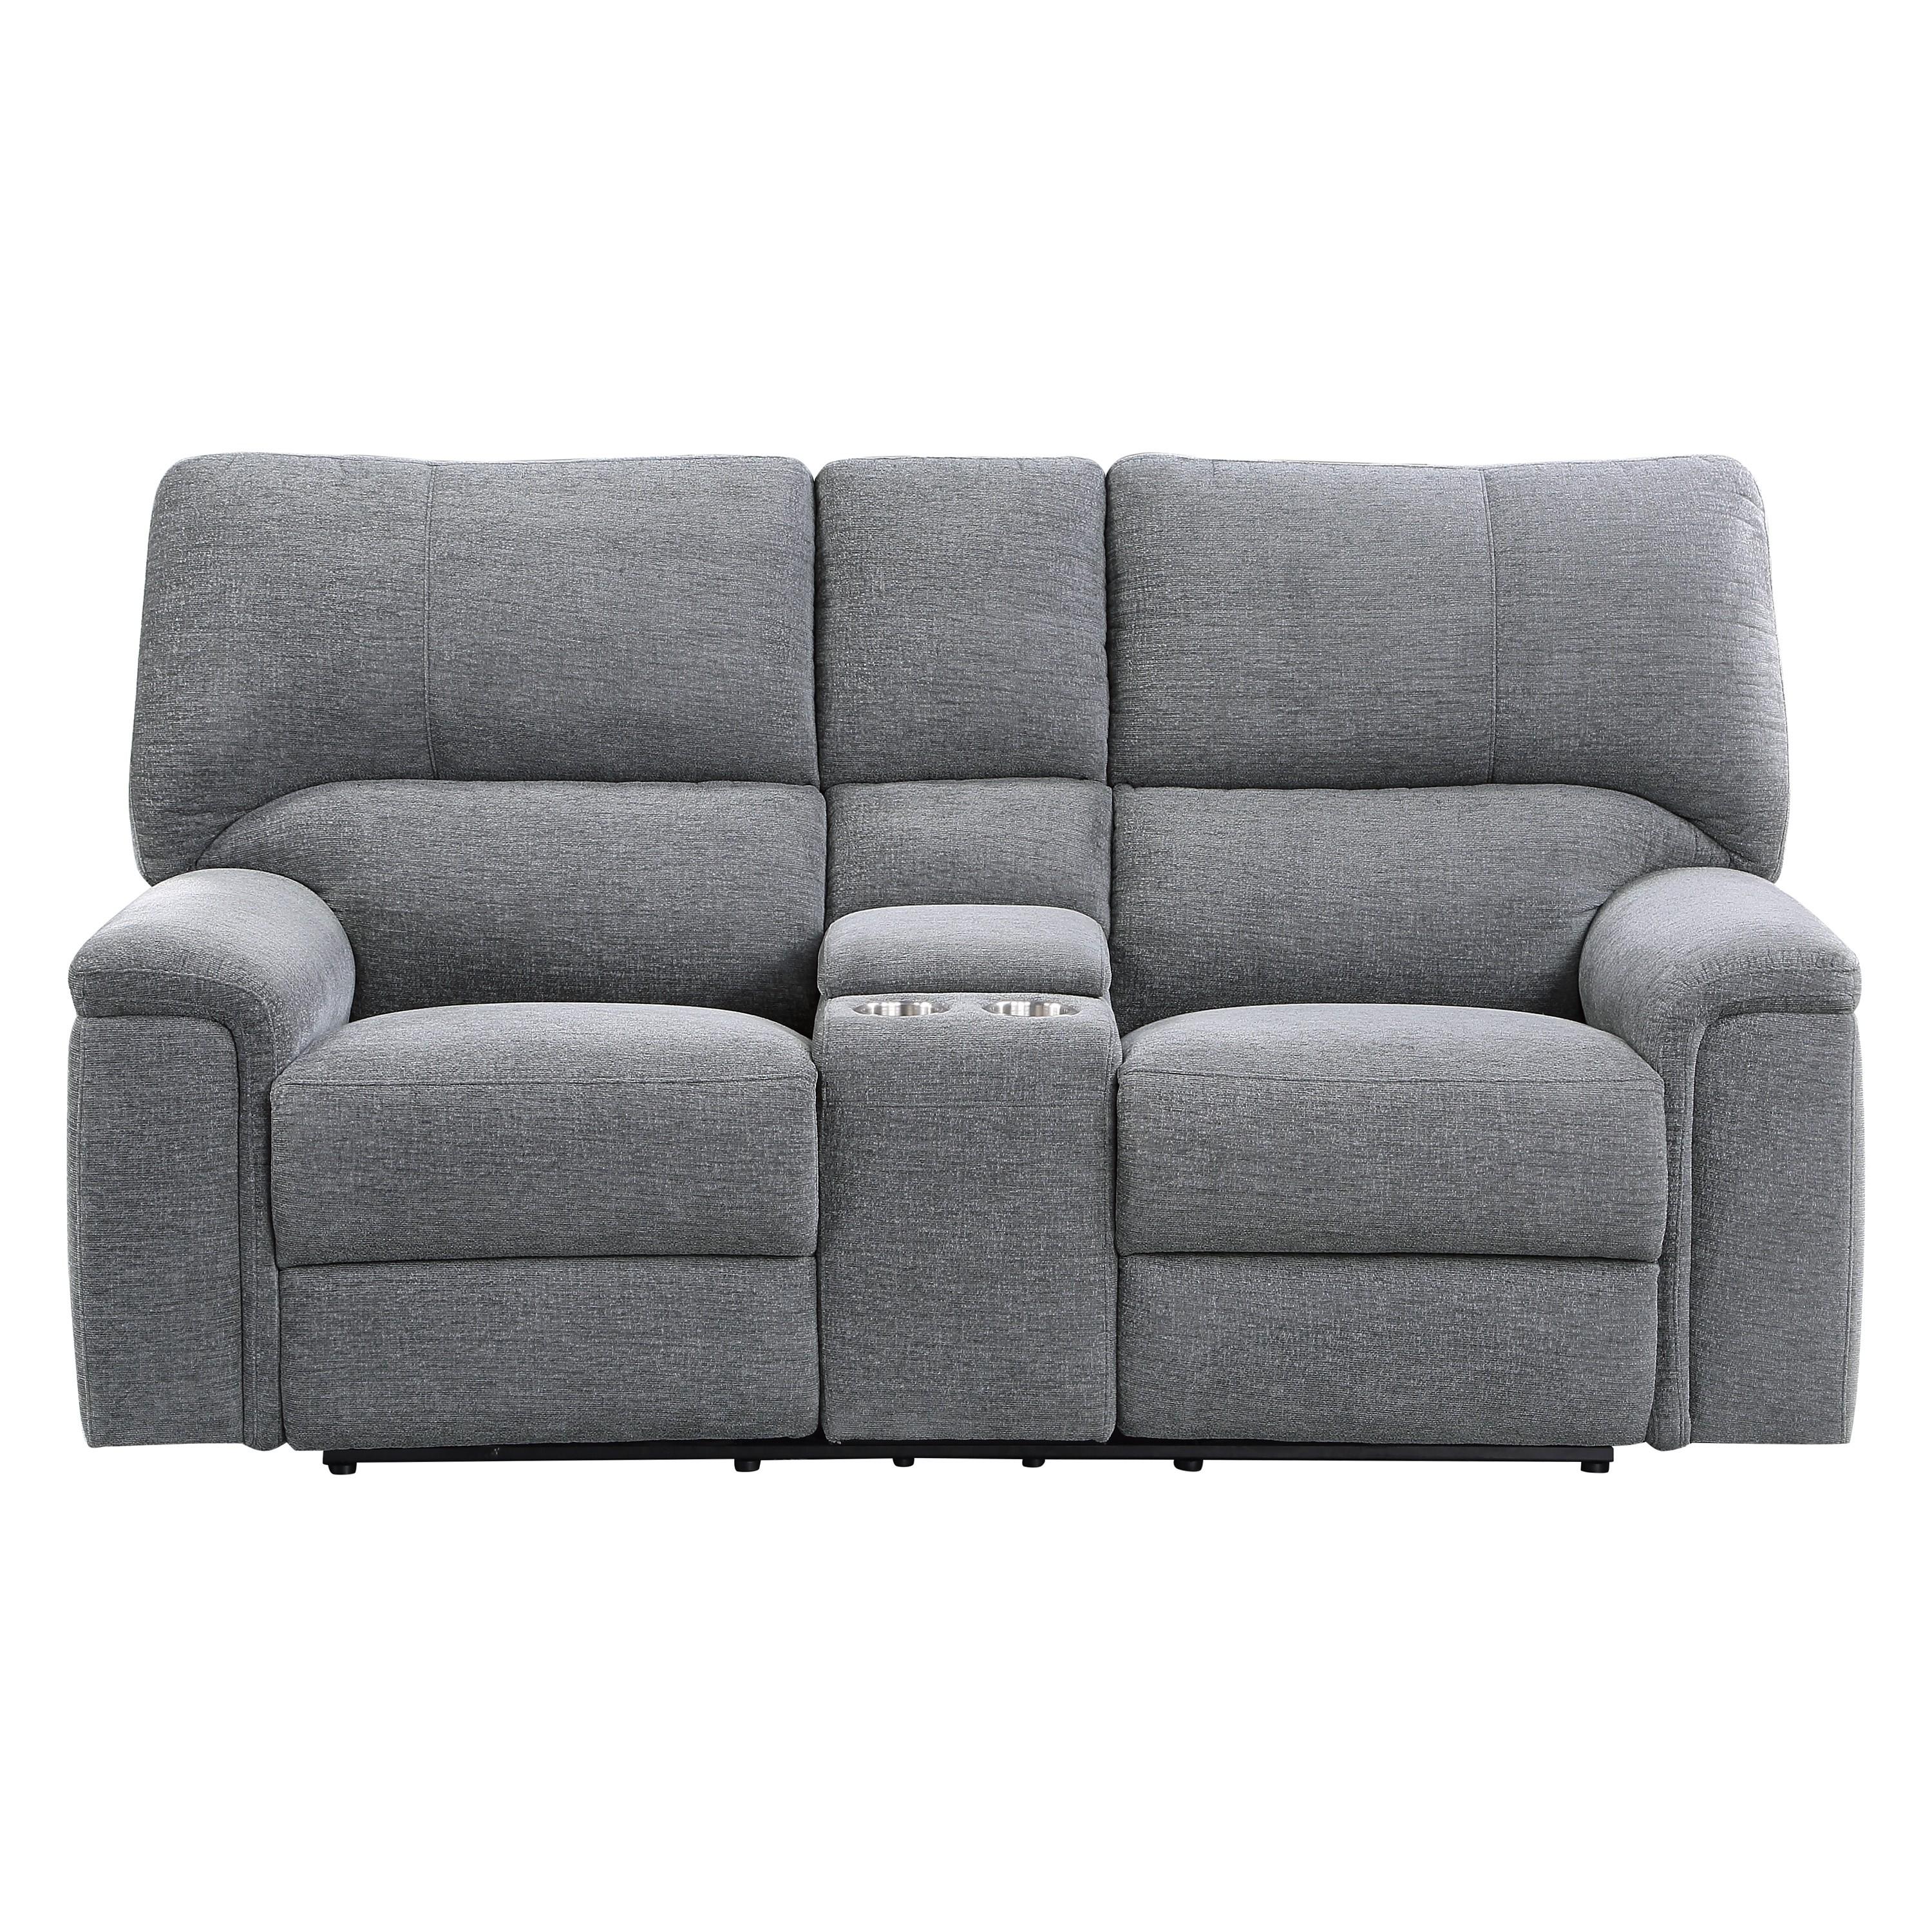 Transitional Power Reclining Loveseat 9413CC-2PWH Dickinson 9413CC-2PWH in Charcoal Chenille